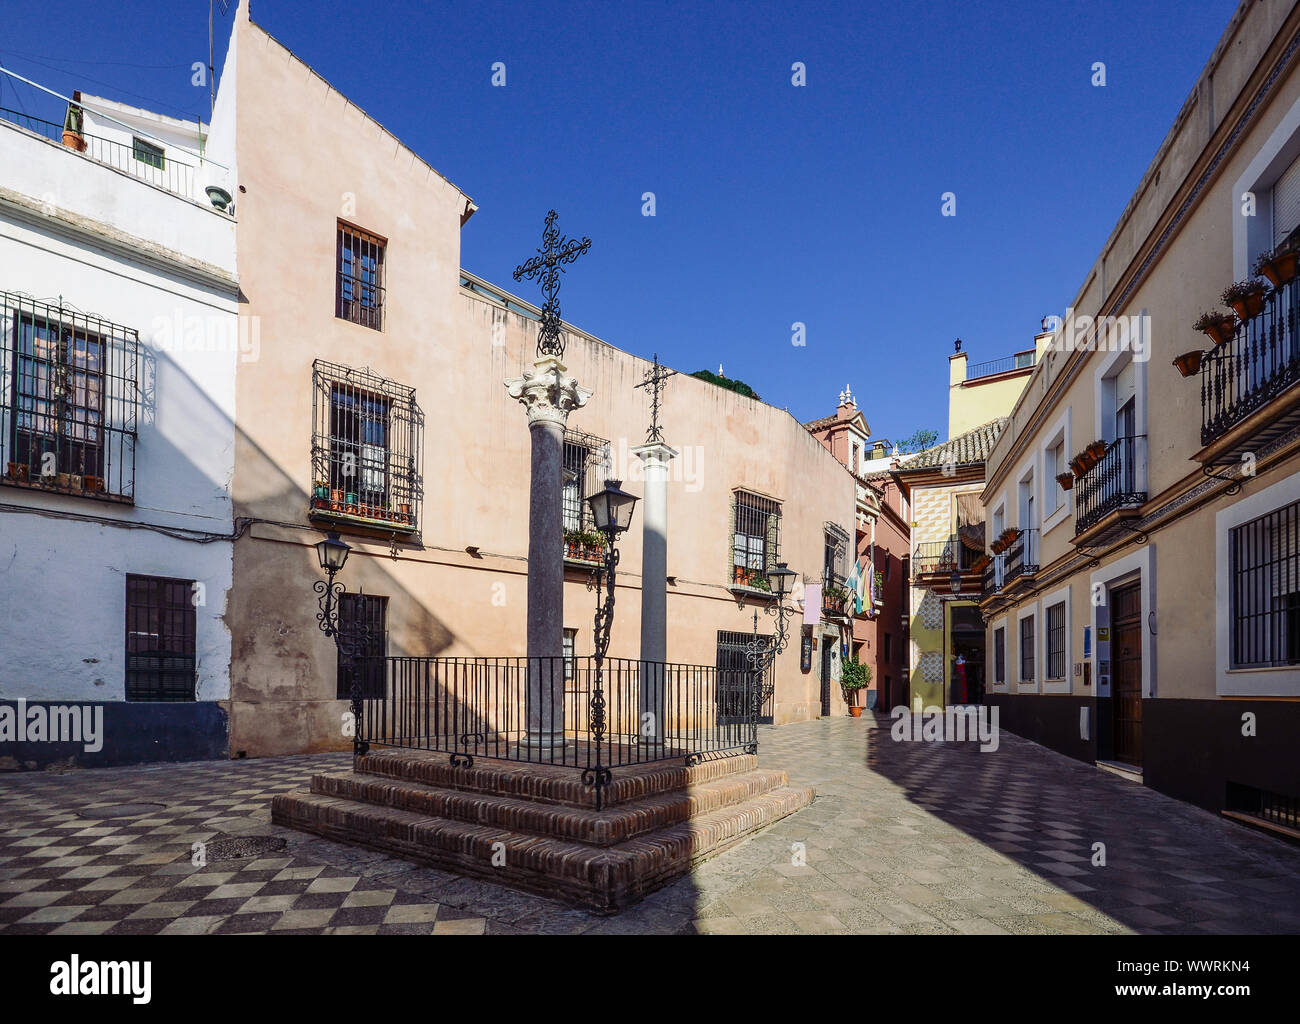 Cross of Locksmith in the famous neighborhood of Holy Cross, also known as Barrio de Santa Cruz, Seville, Andalusia, Spain, a former Jewish Quarter - Stock Photo